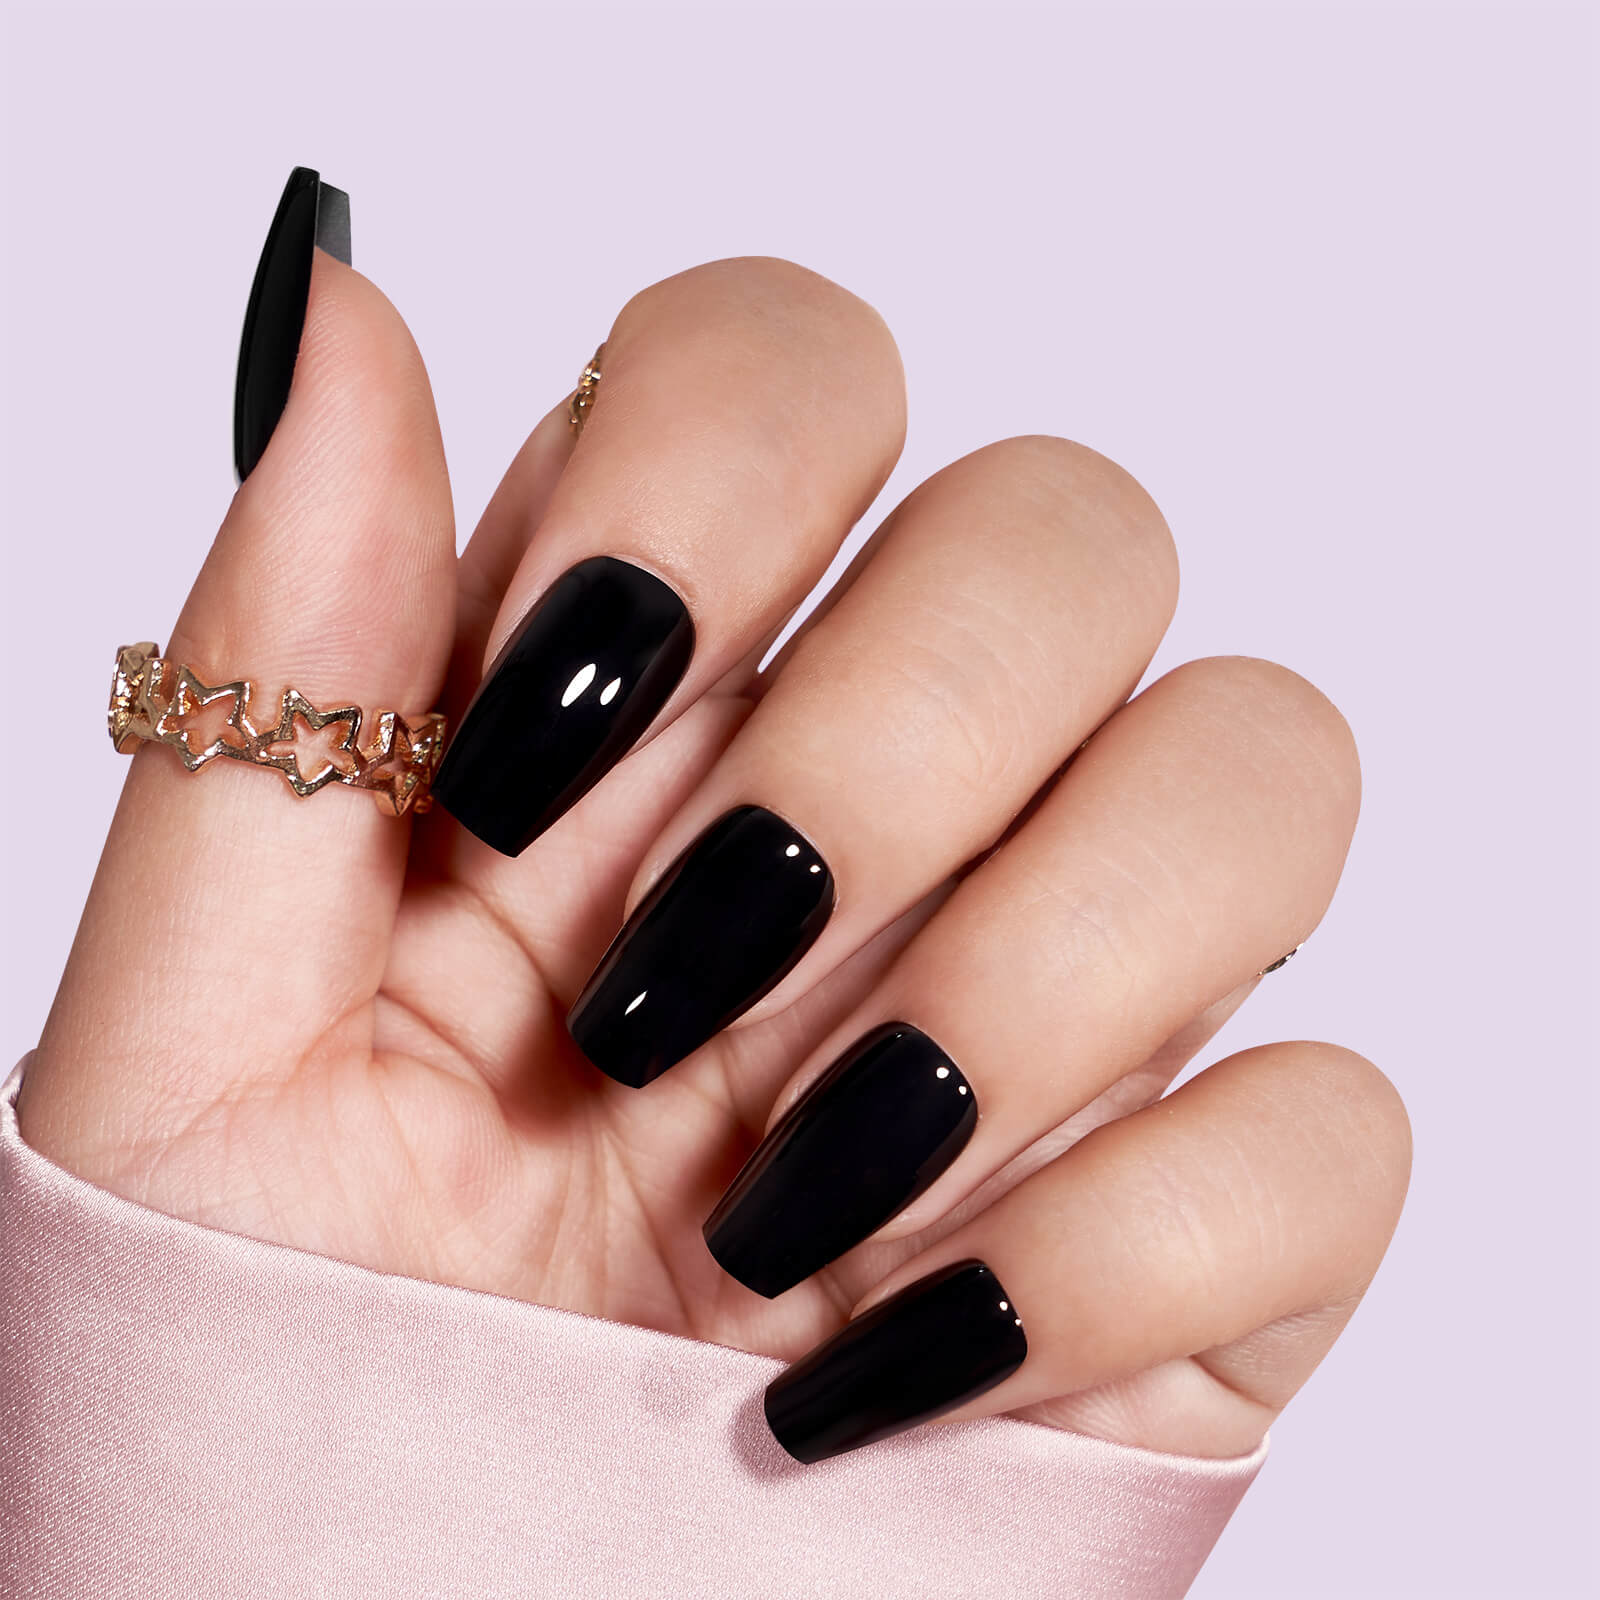 Buy MISUD Stiletto Fake Nails 24 Pcs Matte Surface Black Almond Sharp Shape  Press-on Style Art Artificial Nails Fashion False Nail Tips Online at Low  Prices in India - Amazon.in